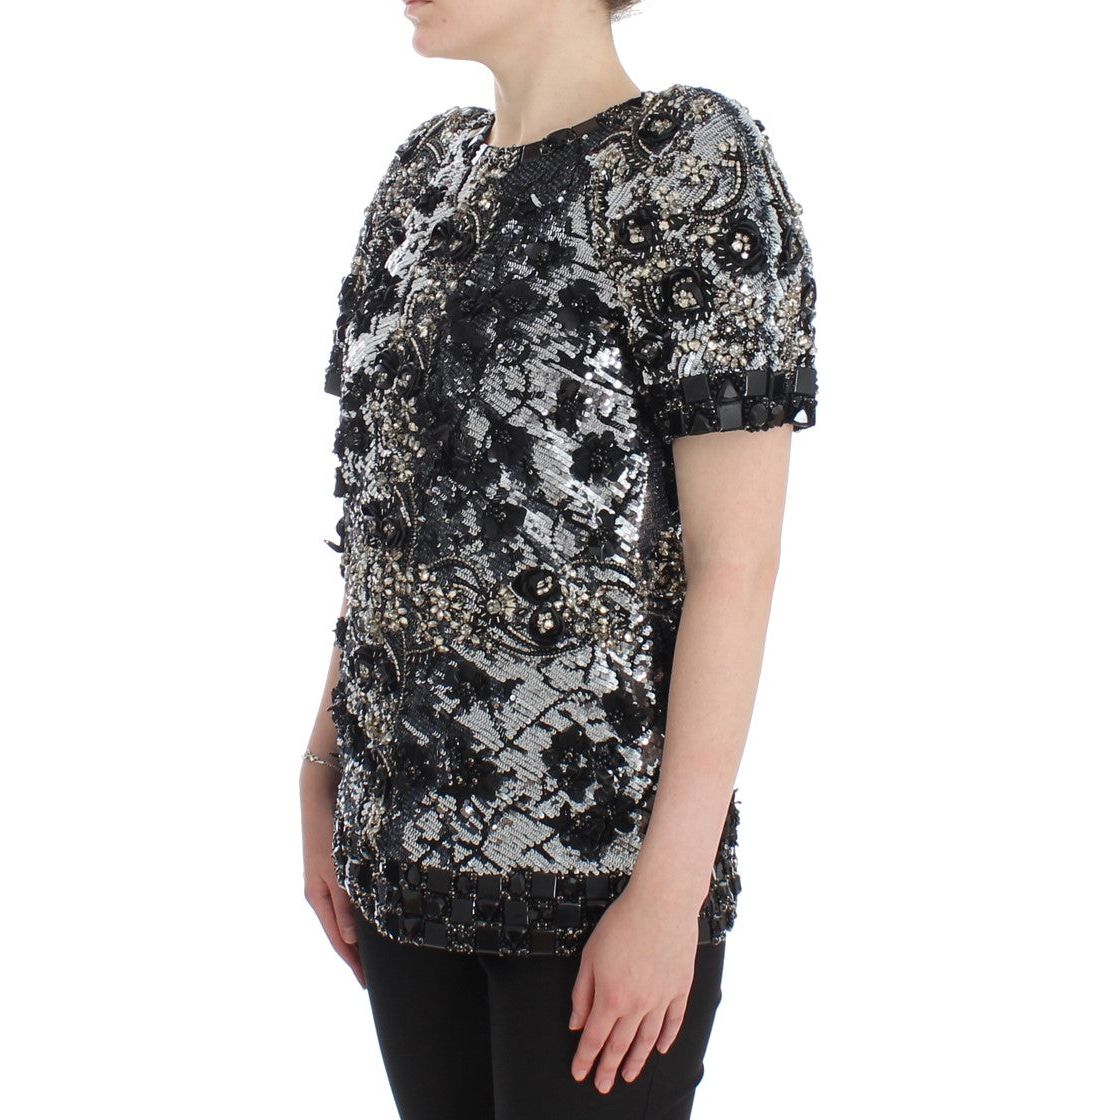 Dolce & Gabbana Crystal Embellished Knight Inspired Top black-clear-crystal-runway-blouse-top